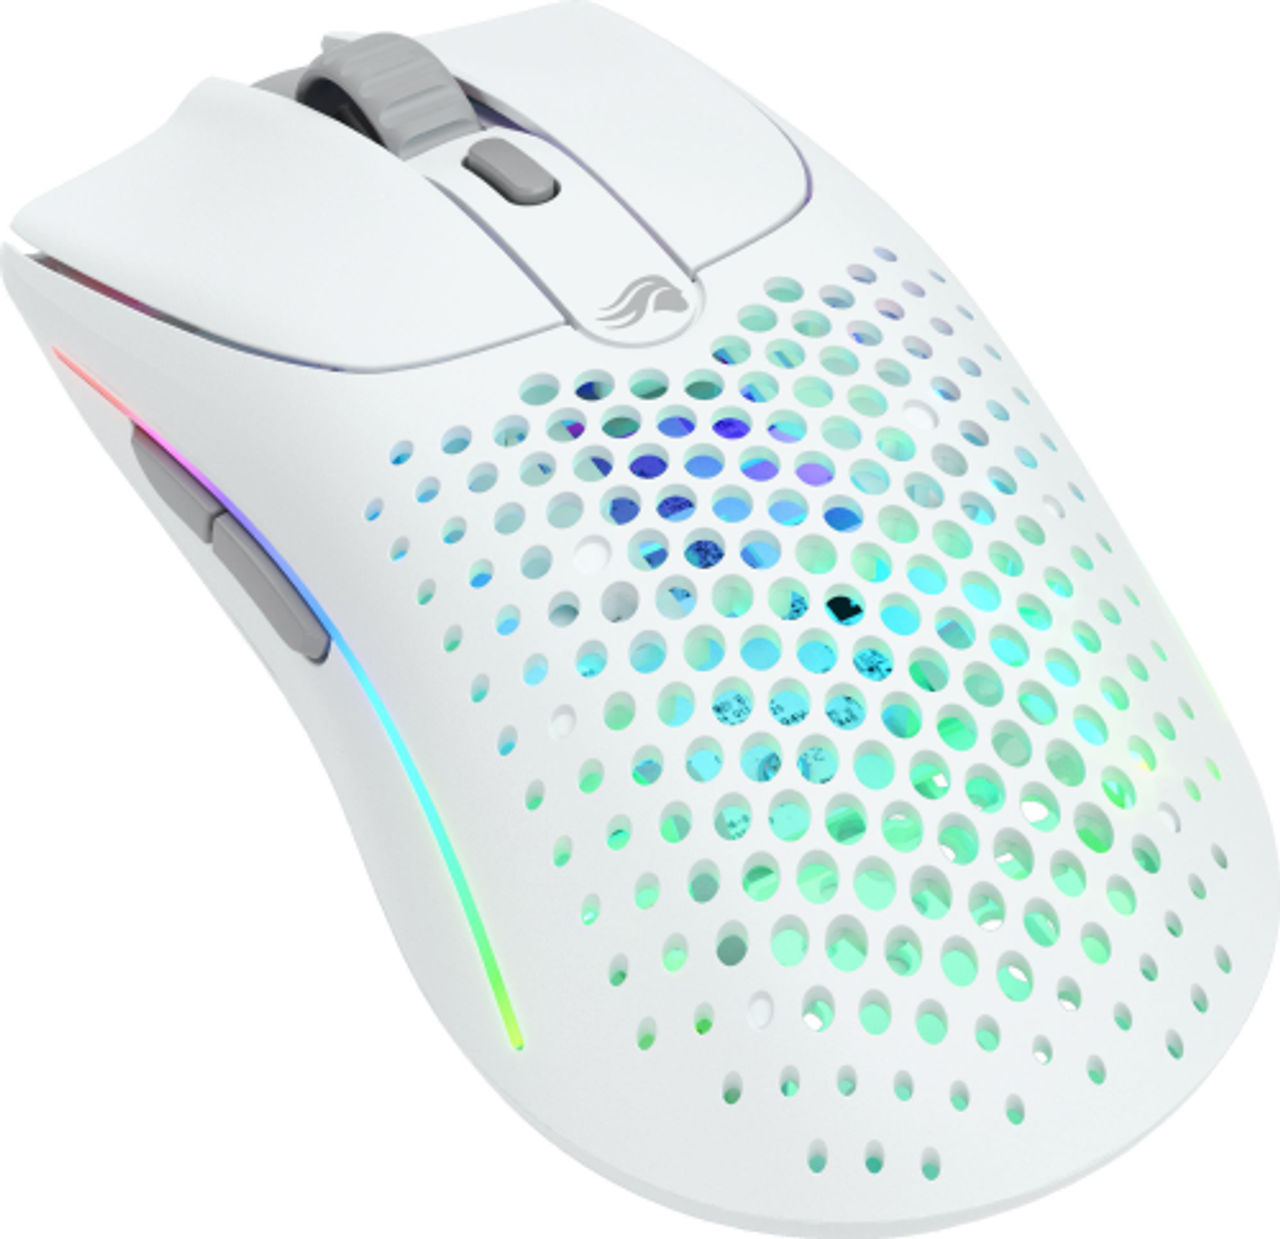 Glorious - Model O 2 Wireless Ultralight Gaming Mouse - Matte White